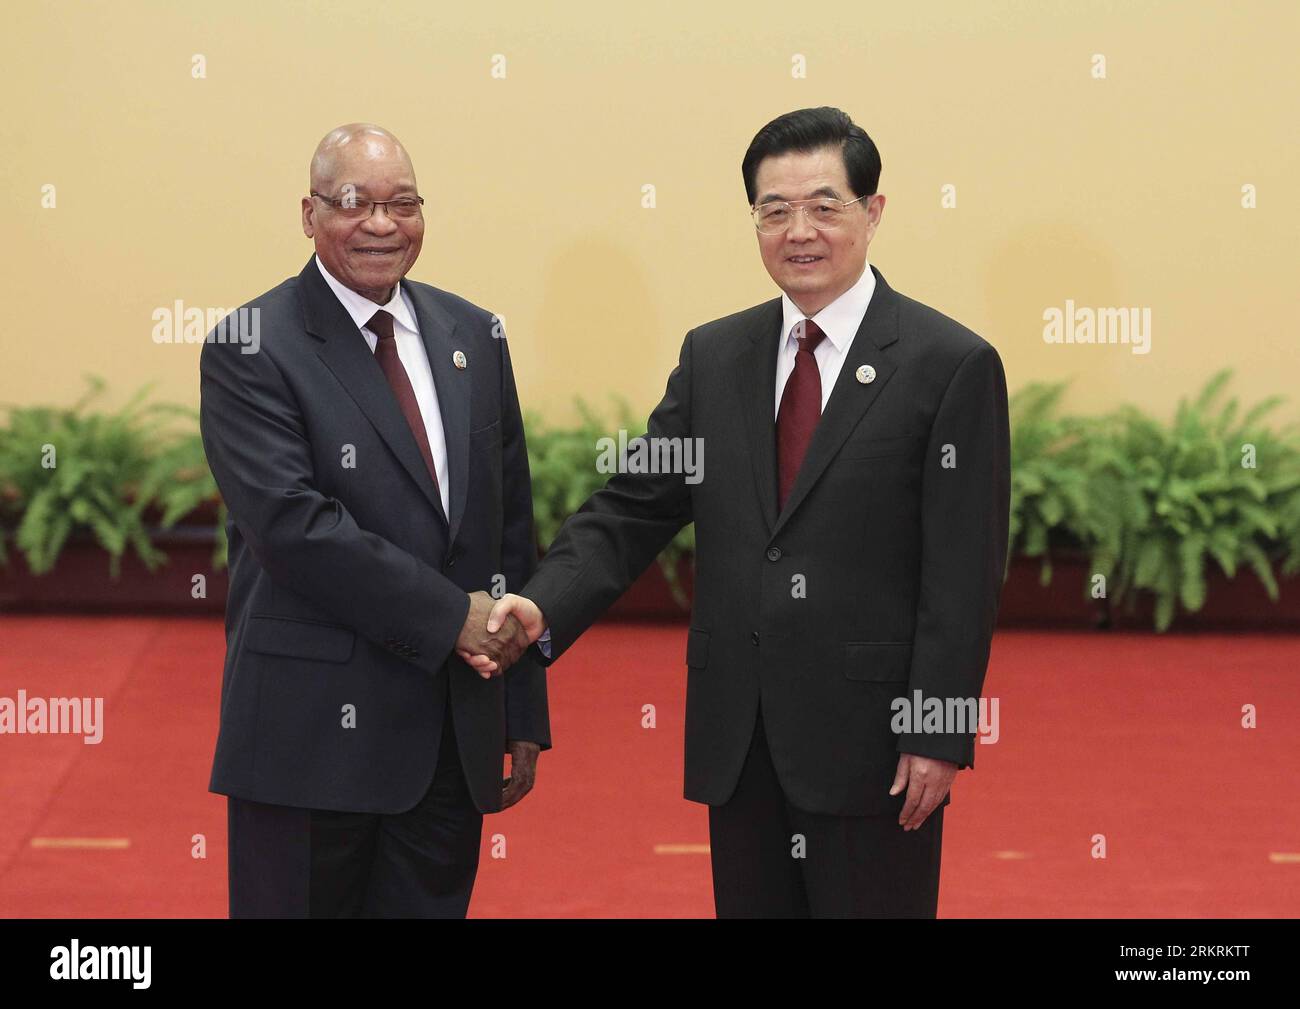 Bildnummer: 58276004  Datum: 19.07.2012  Copyright: imago/Xinhua (120719) -- BEIJING, July 19, 2012 (Xinhua) -- Chinese President Hu Jintao (R) shakes hands with President of South Africa Jacob Zuma as they attend the opening ceremony of the Fifth Ministerial Conference of the Forum on China-Africa Cooperation (FOCAC) in Beijing, capital of China, July 19, 2012. (Xinhua/Ding Lin) (lfj) CHINA-BEIJING-FOCAC-MINISTERIAL CONFERENCE-MEETING (CN) PUBLICATIONxNOTxINxCHN People Politik FOCAC Gipfel xjh x0x 2012 quer      58276004 Date 19 07 2012 Copyright Imago XINHUA  Beijing July 19 2012 XINHUA Chin Stock Photo